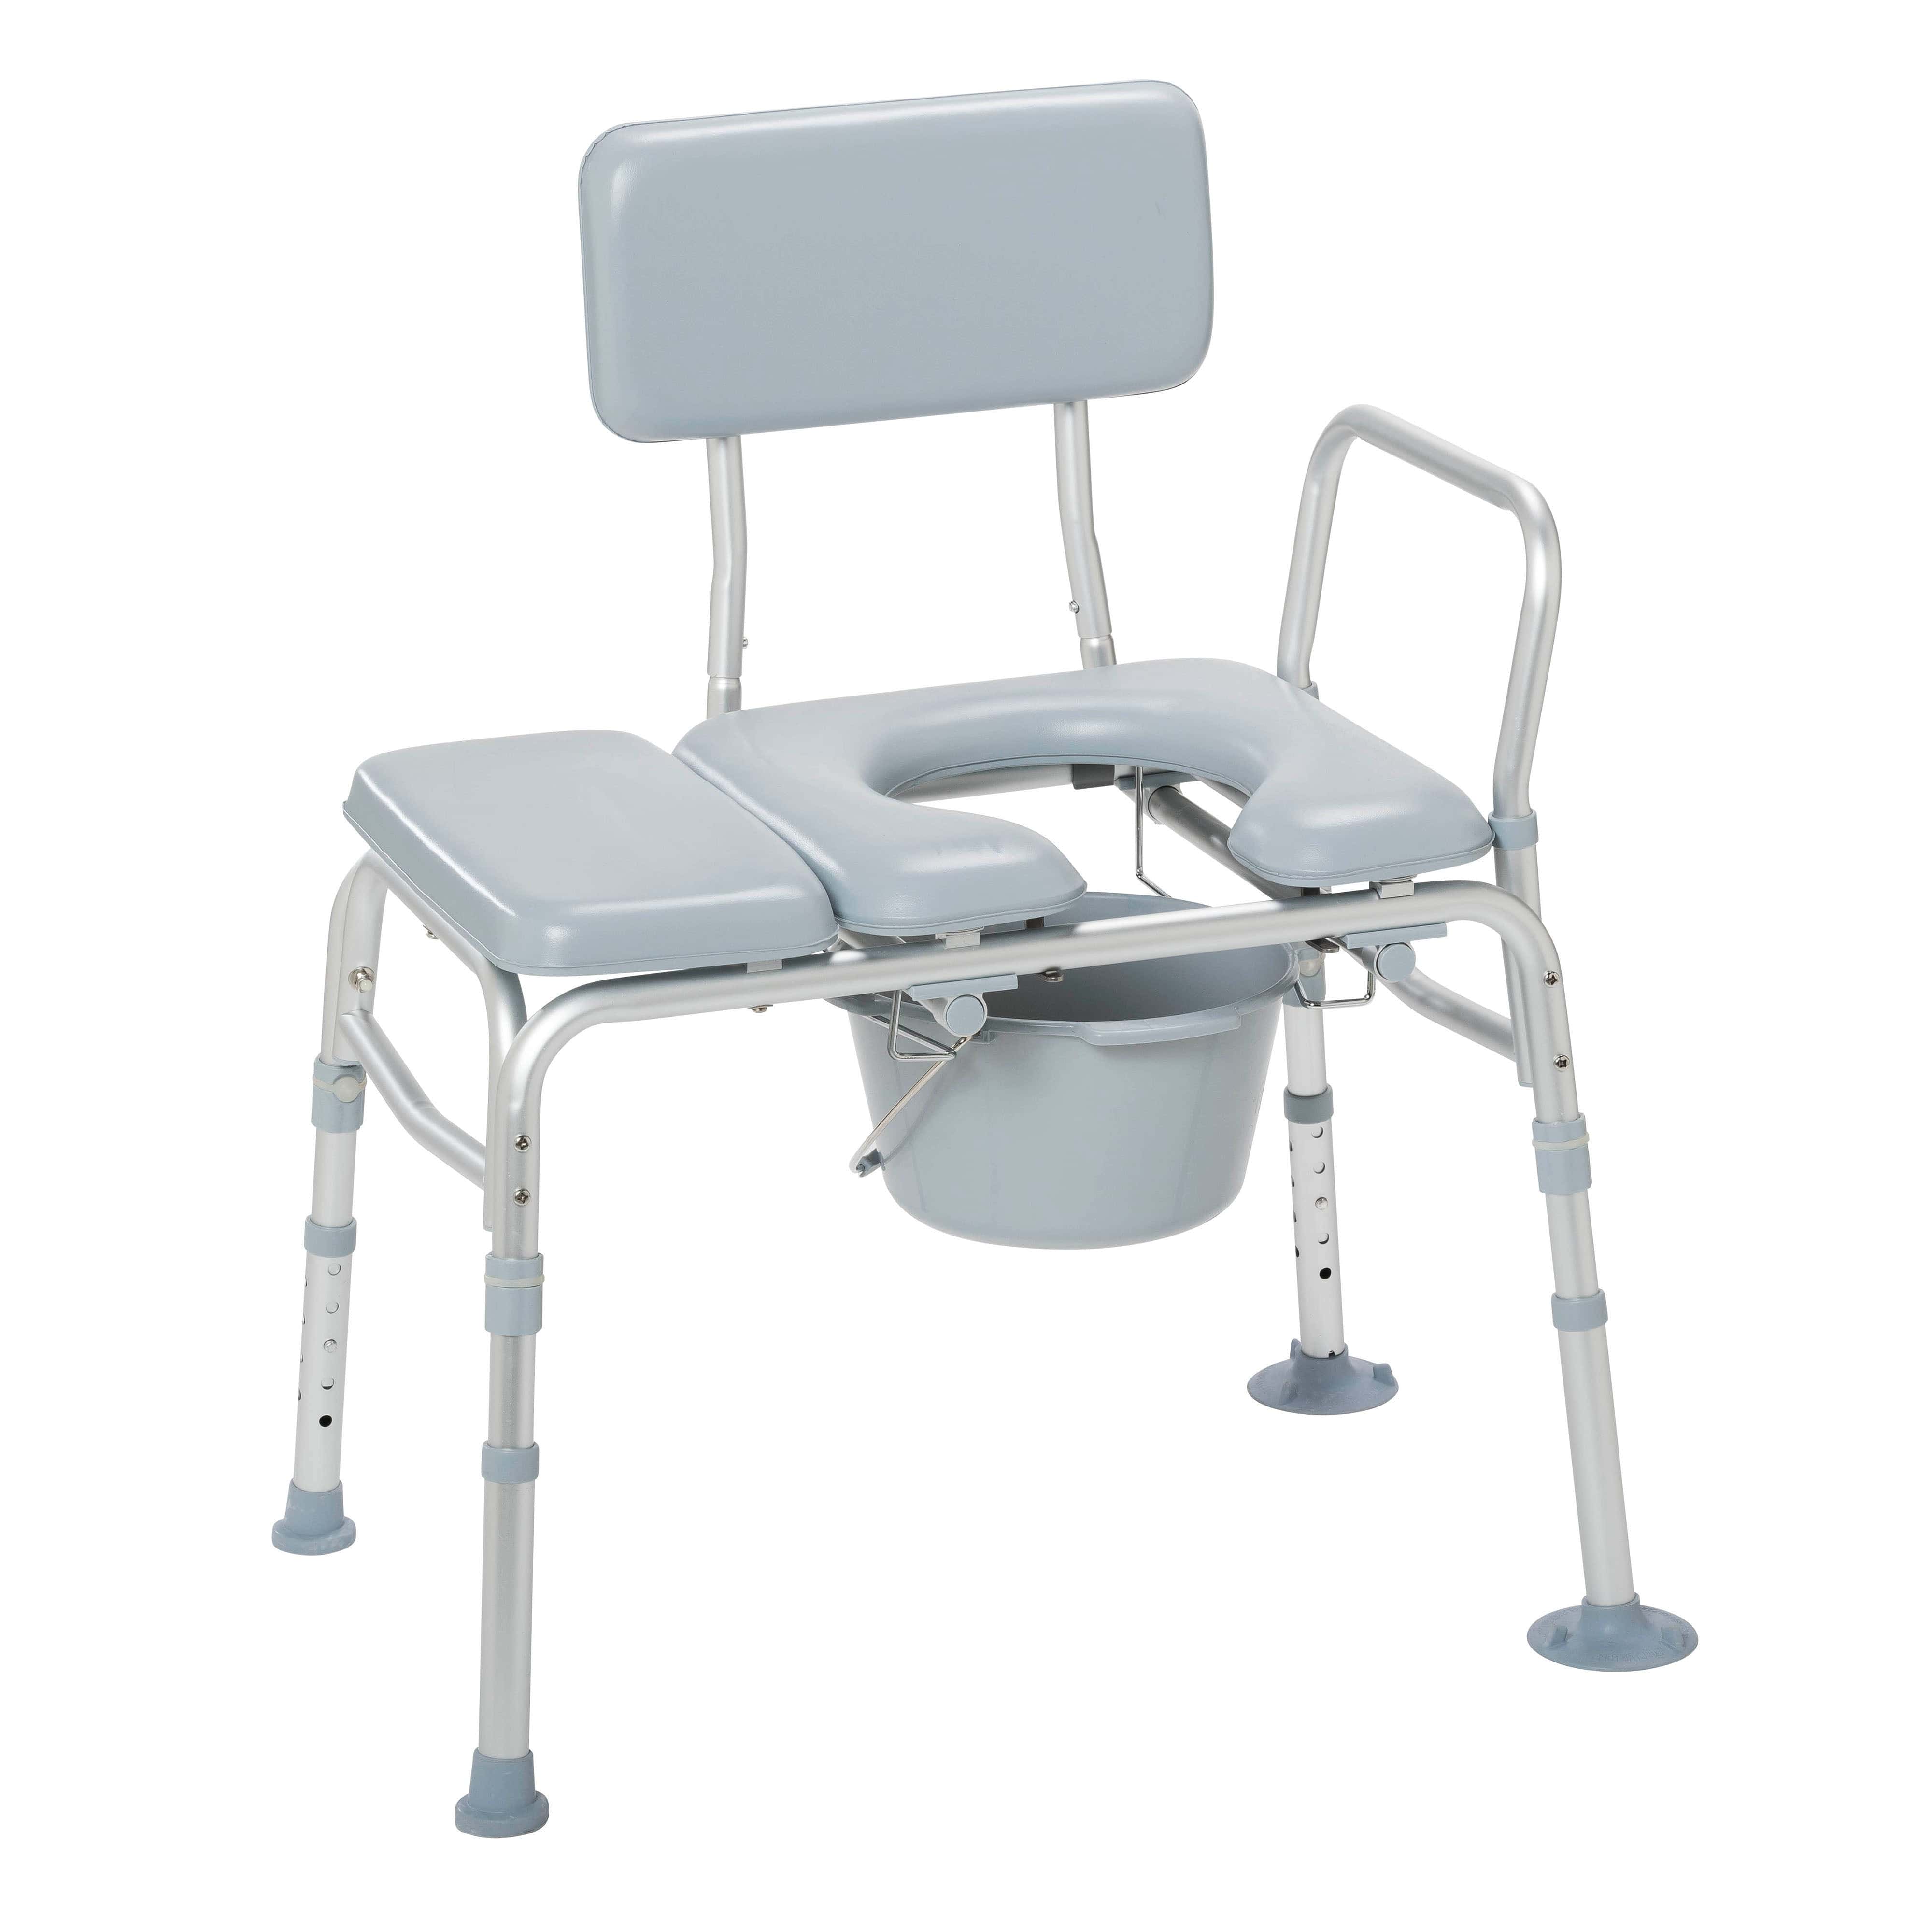 Drive Medical Bathroom Safety Drive Medical Padded Seat Transfer Bench with Commode Opening